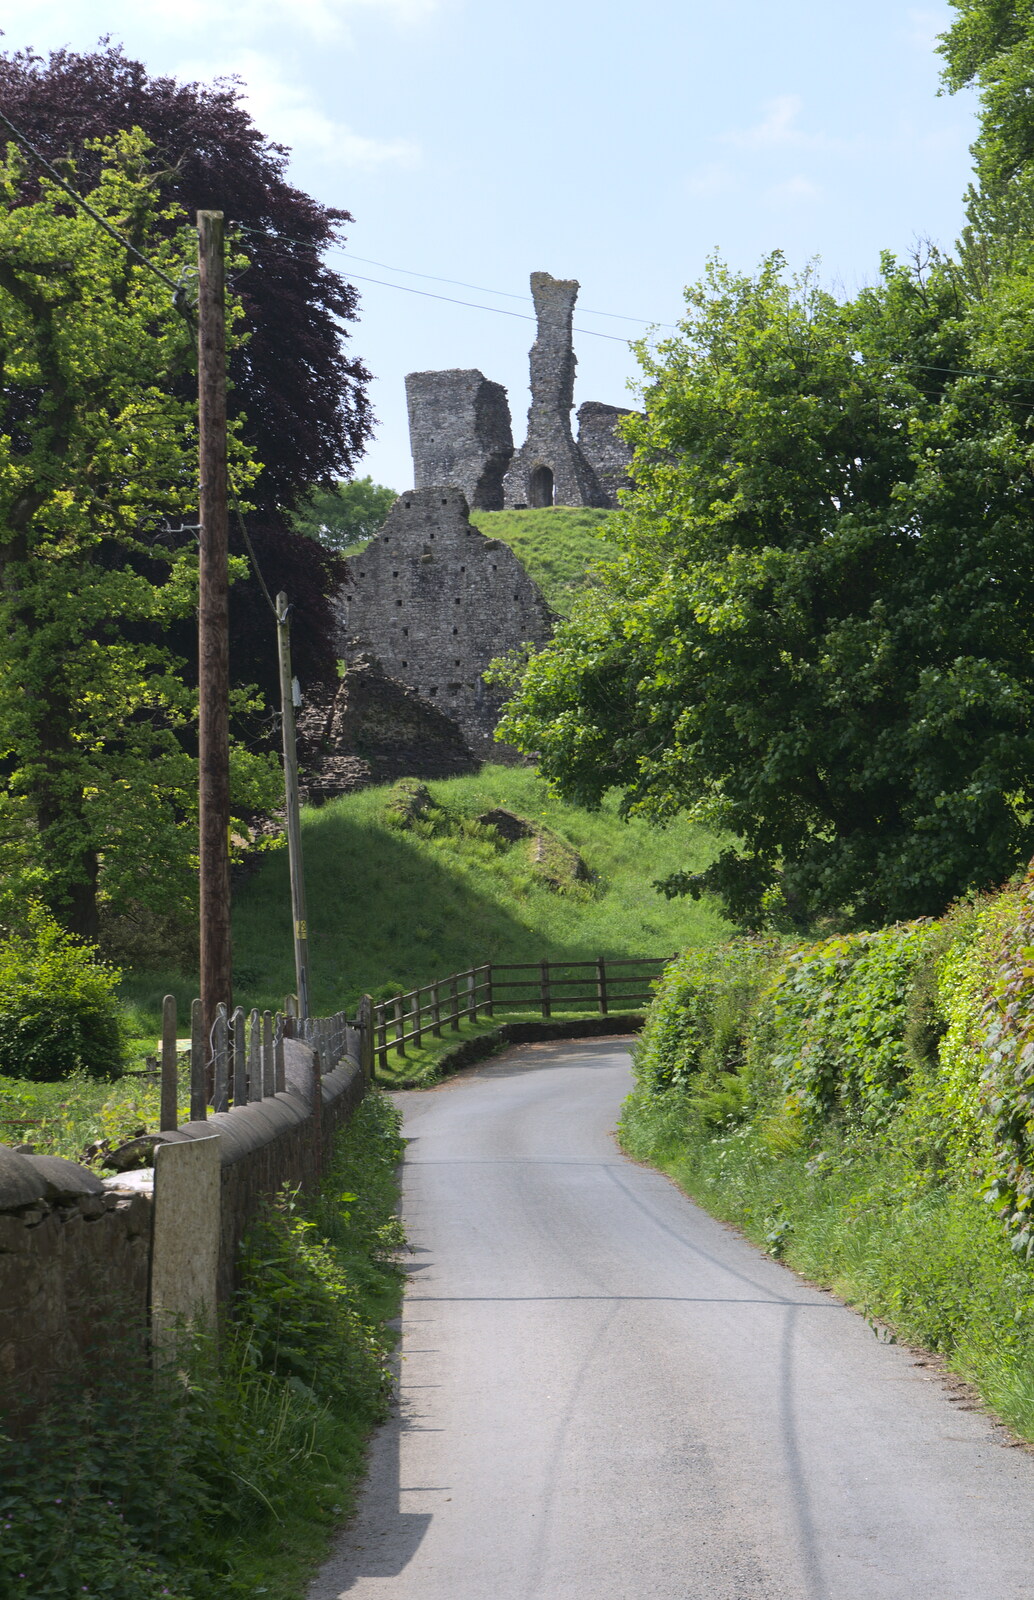 The road up to the castle from A Visit to Okehampton Castle and Dartmoor, Devon  - 28th May 2016